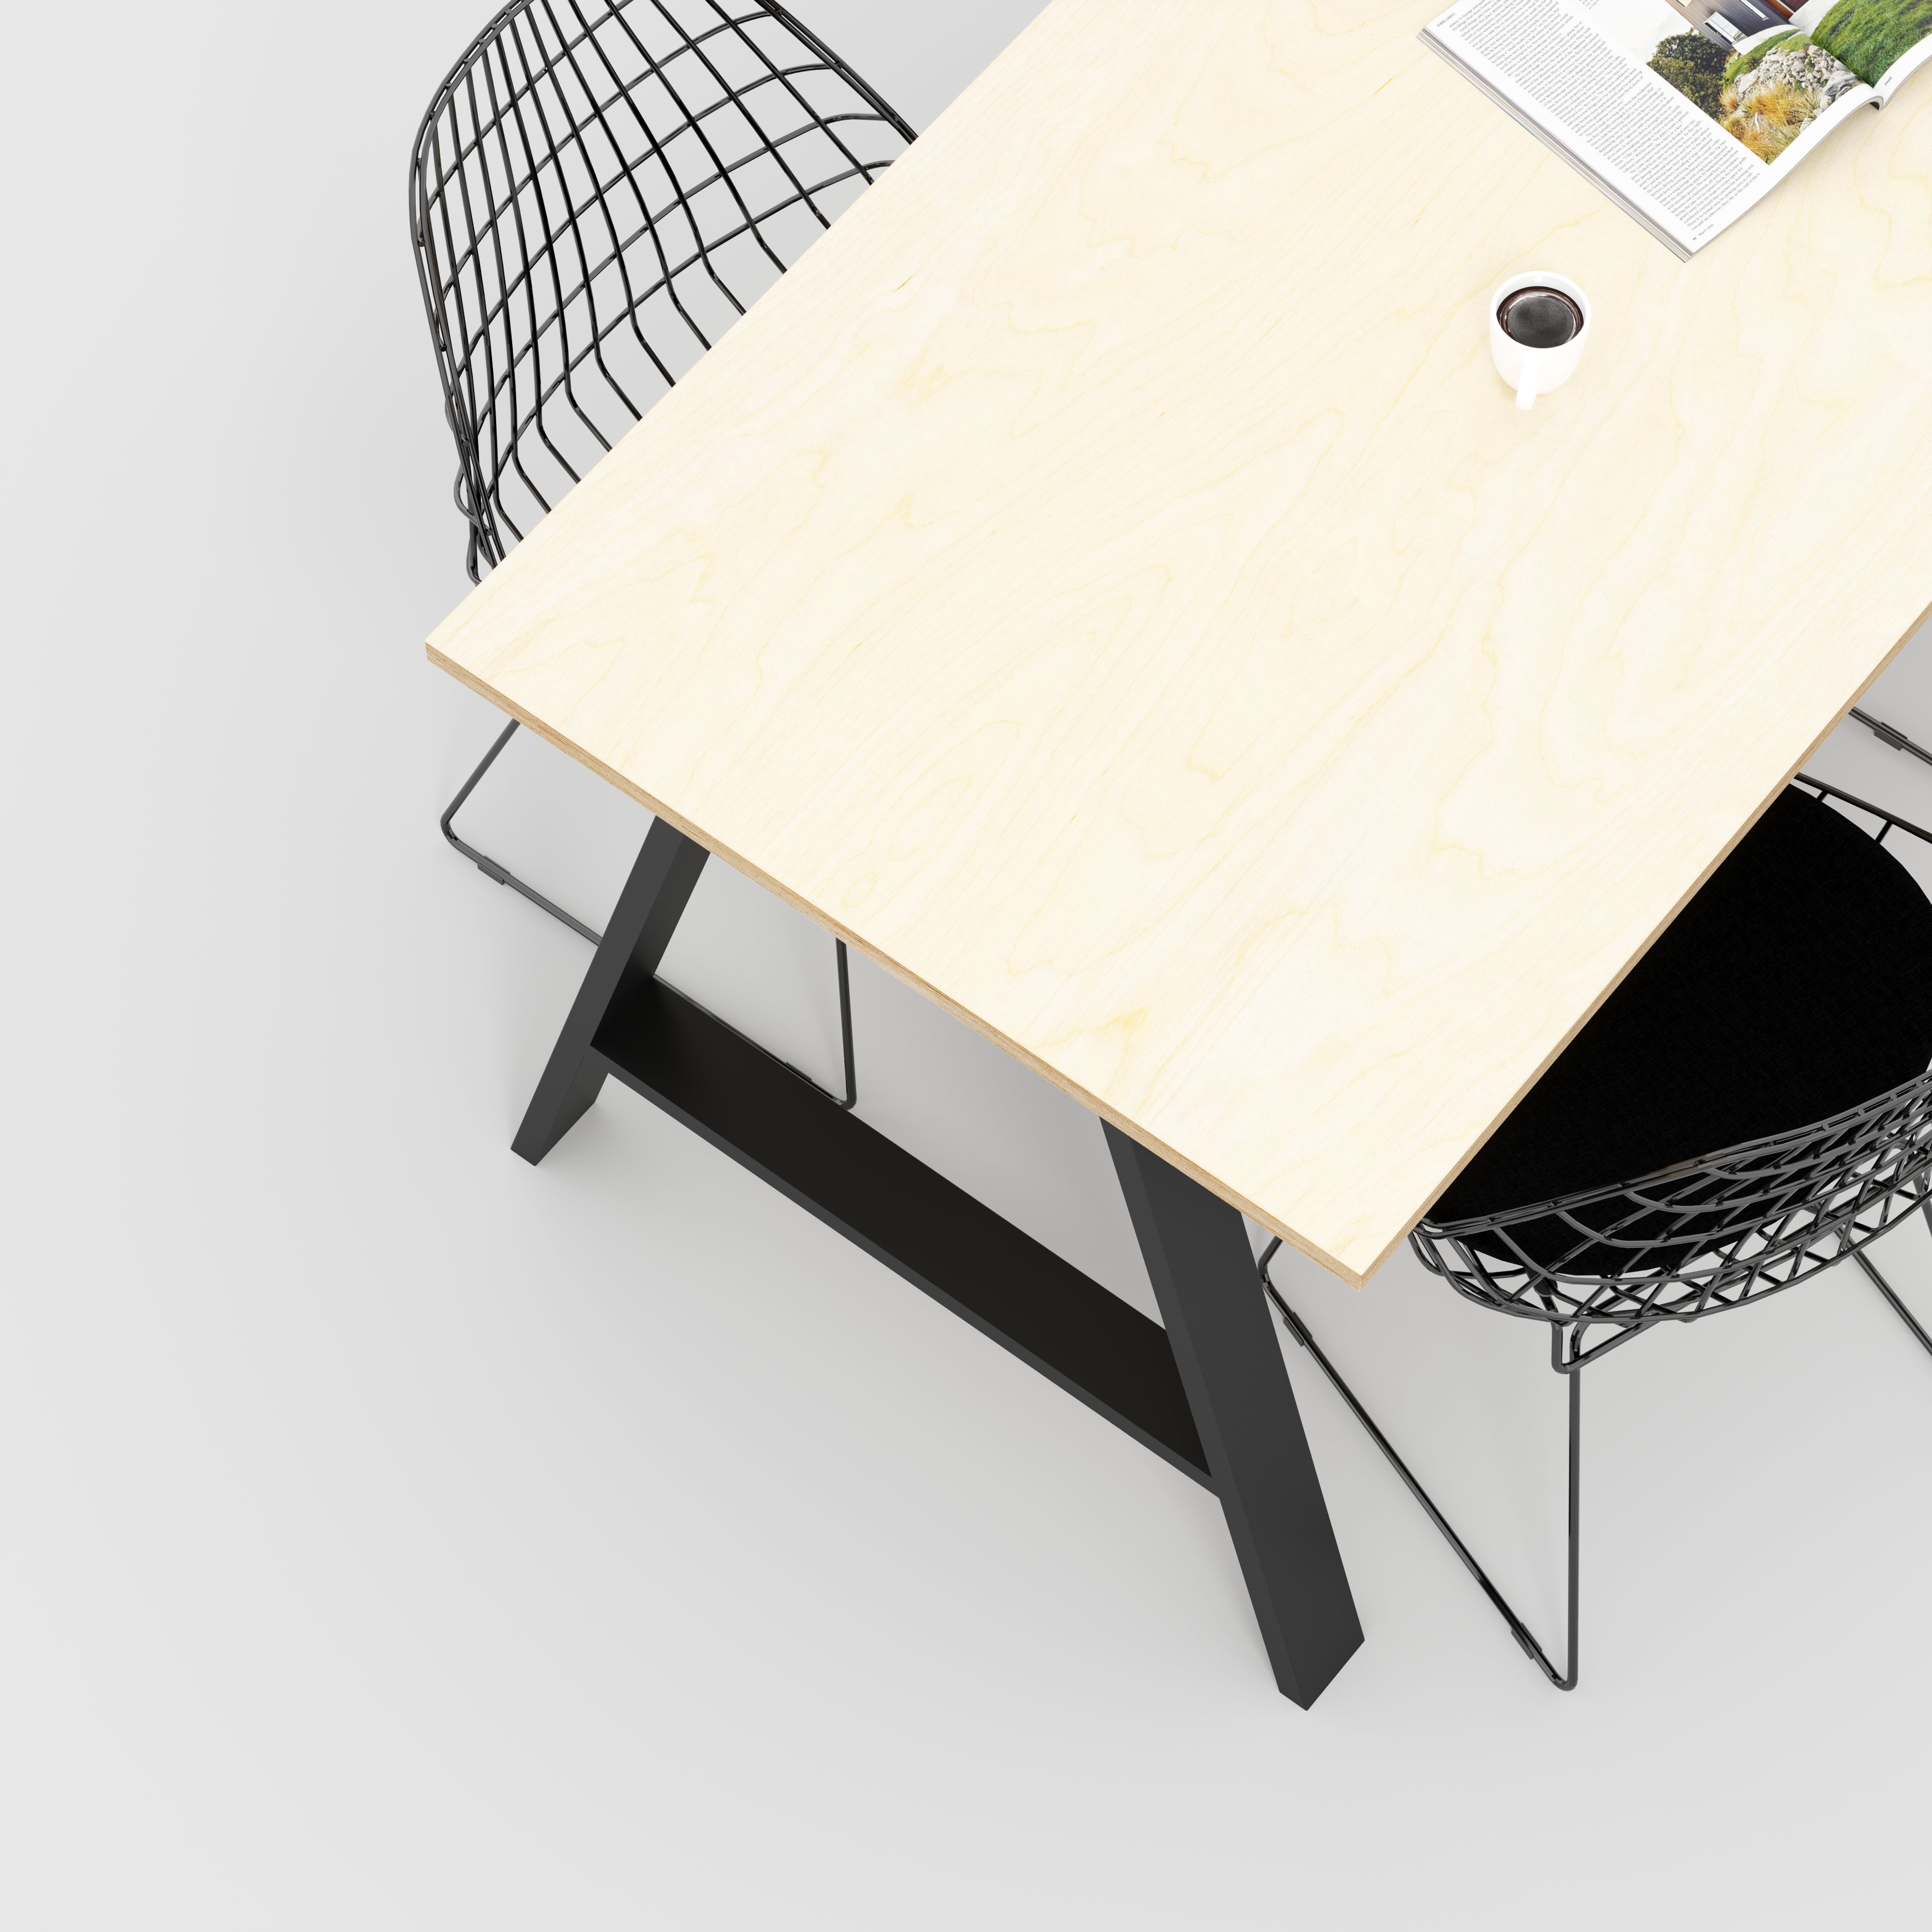 Custom Plywood Table with A-Frame Industrial Legs